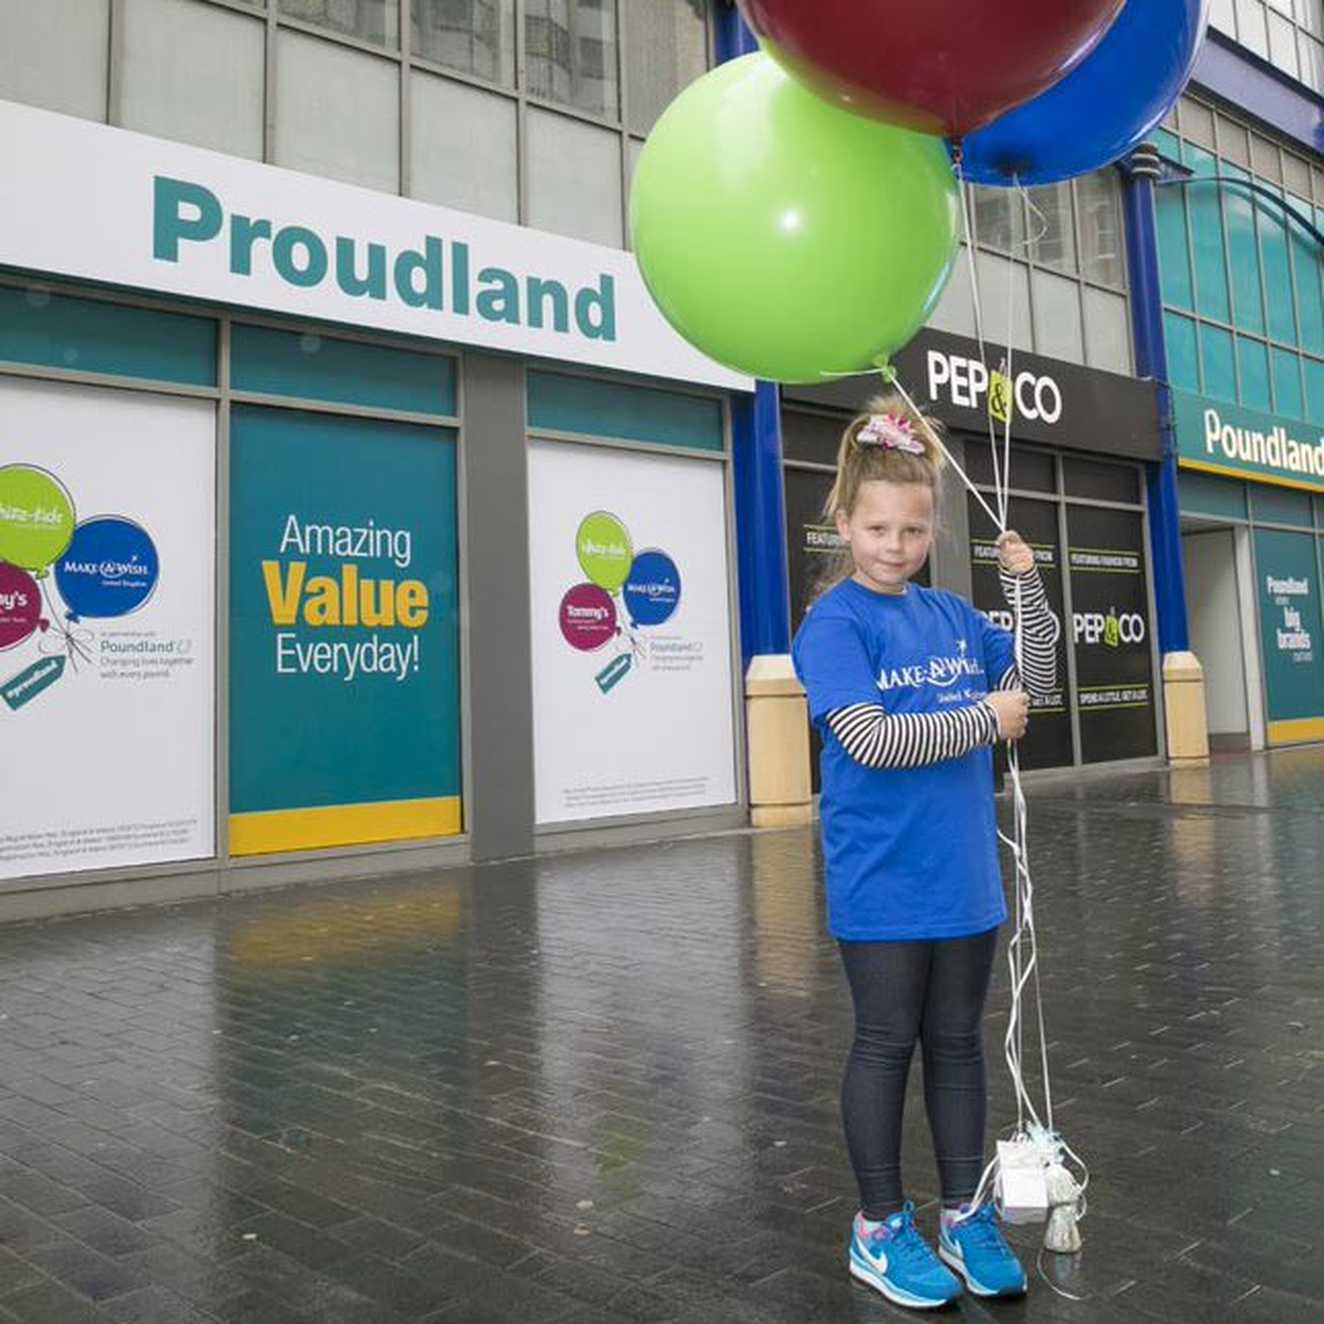 Child with balloons outside a Pounland store